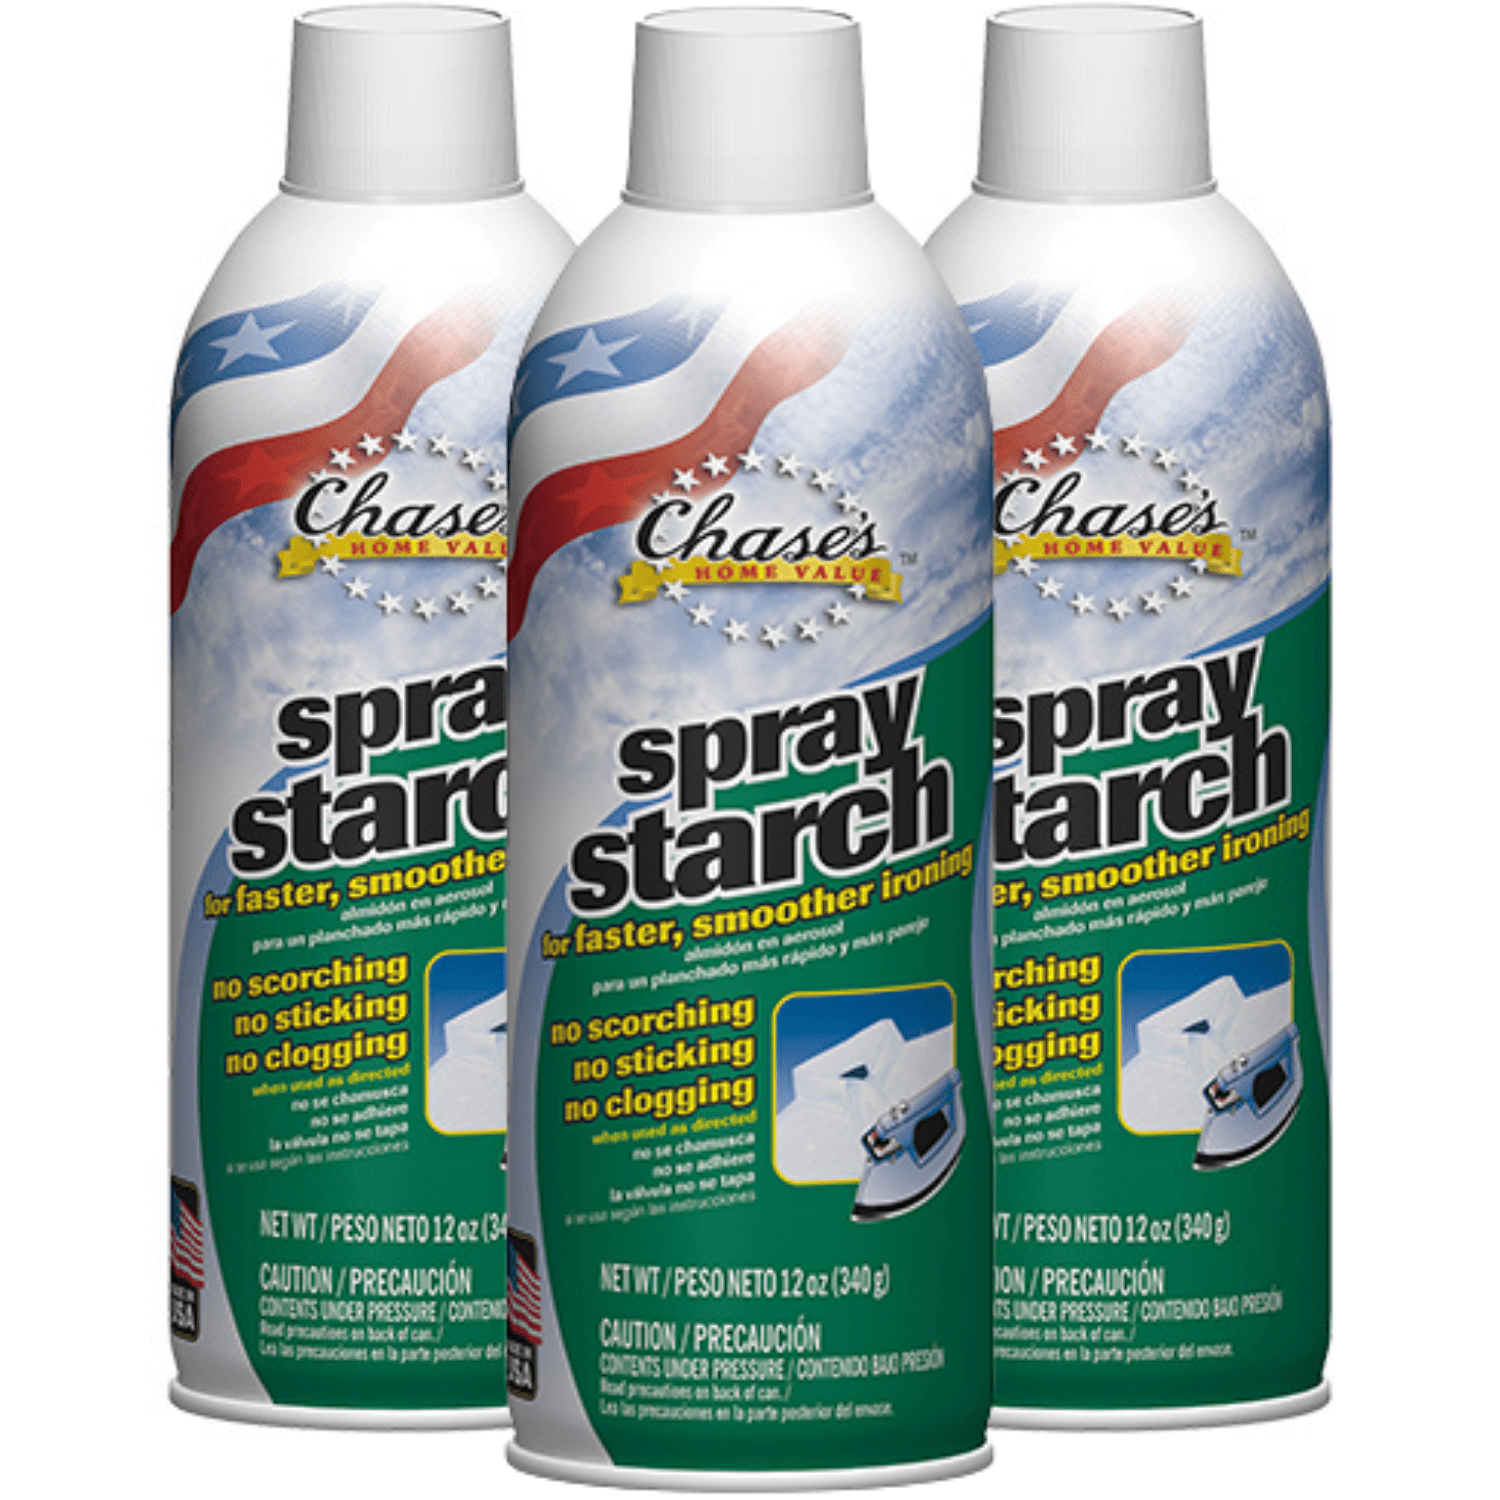 Laundry Starch Spray, Faultless Original Hold Ironing Enhancer Spray Starch  for a Smooth Iron Glide on Clothes & Fabric (20oz 4 Pack) Even Spray, Easy